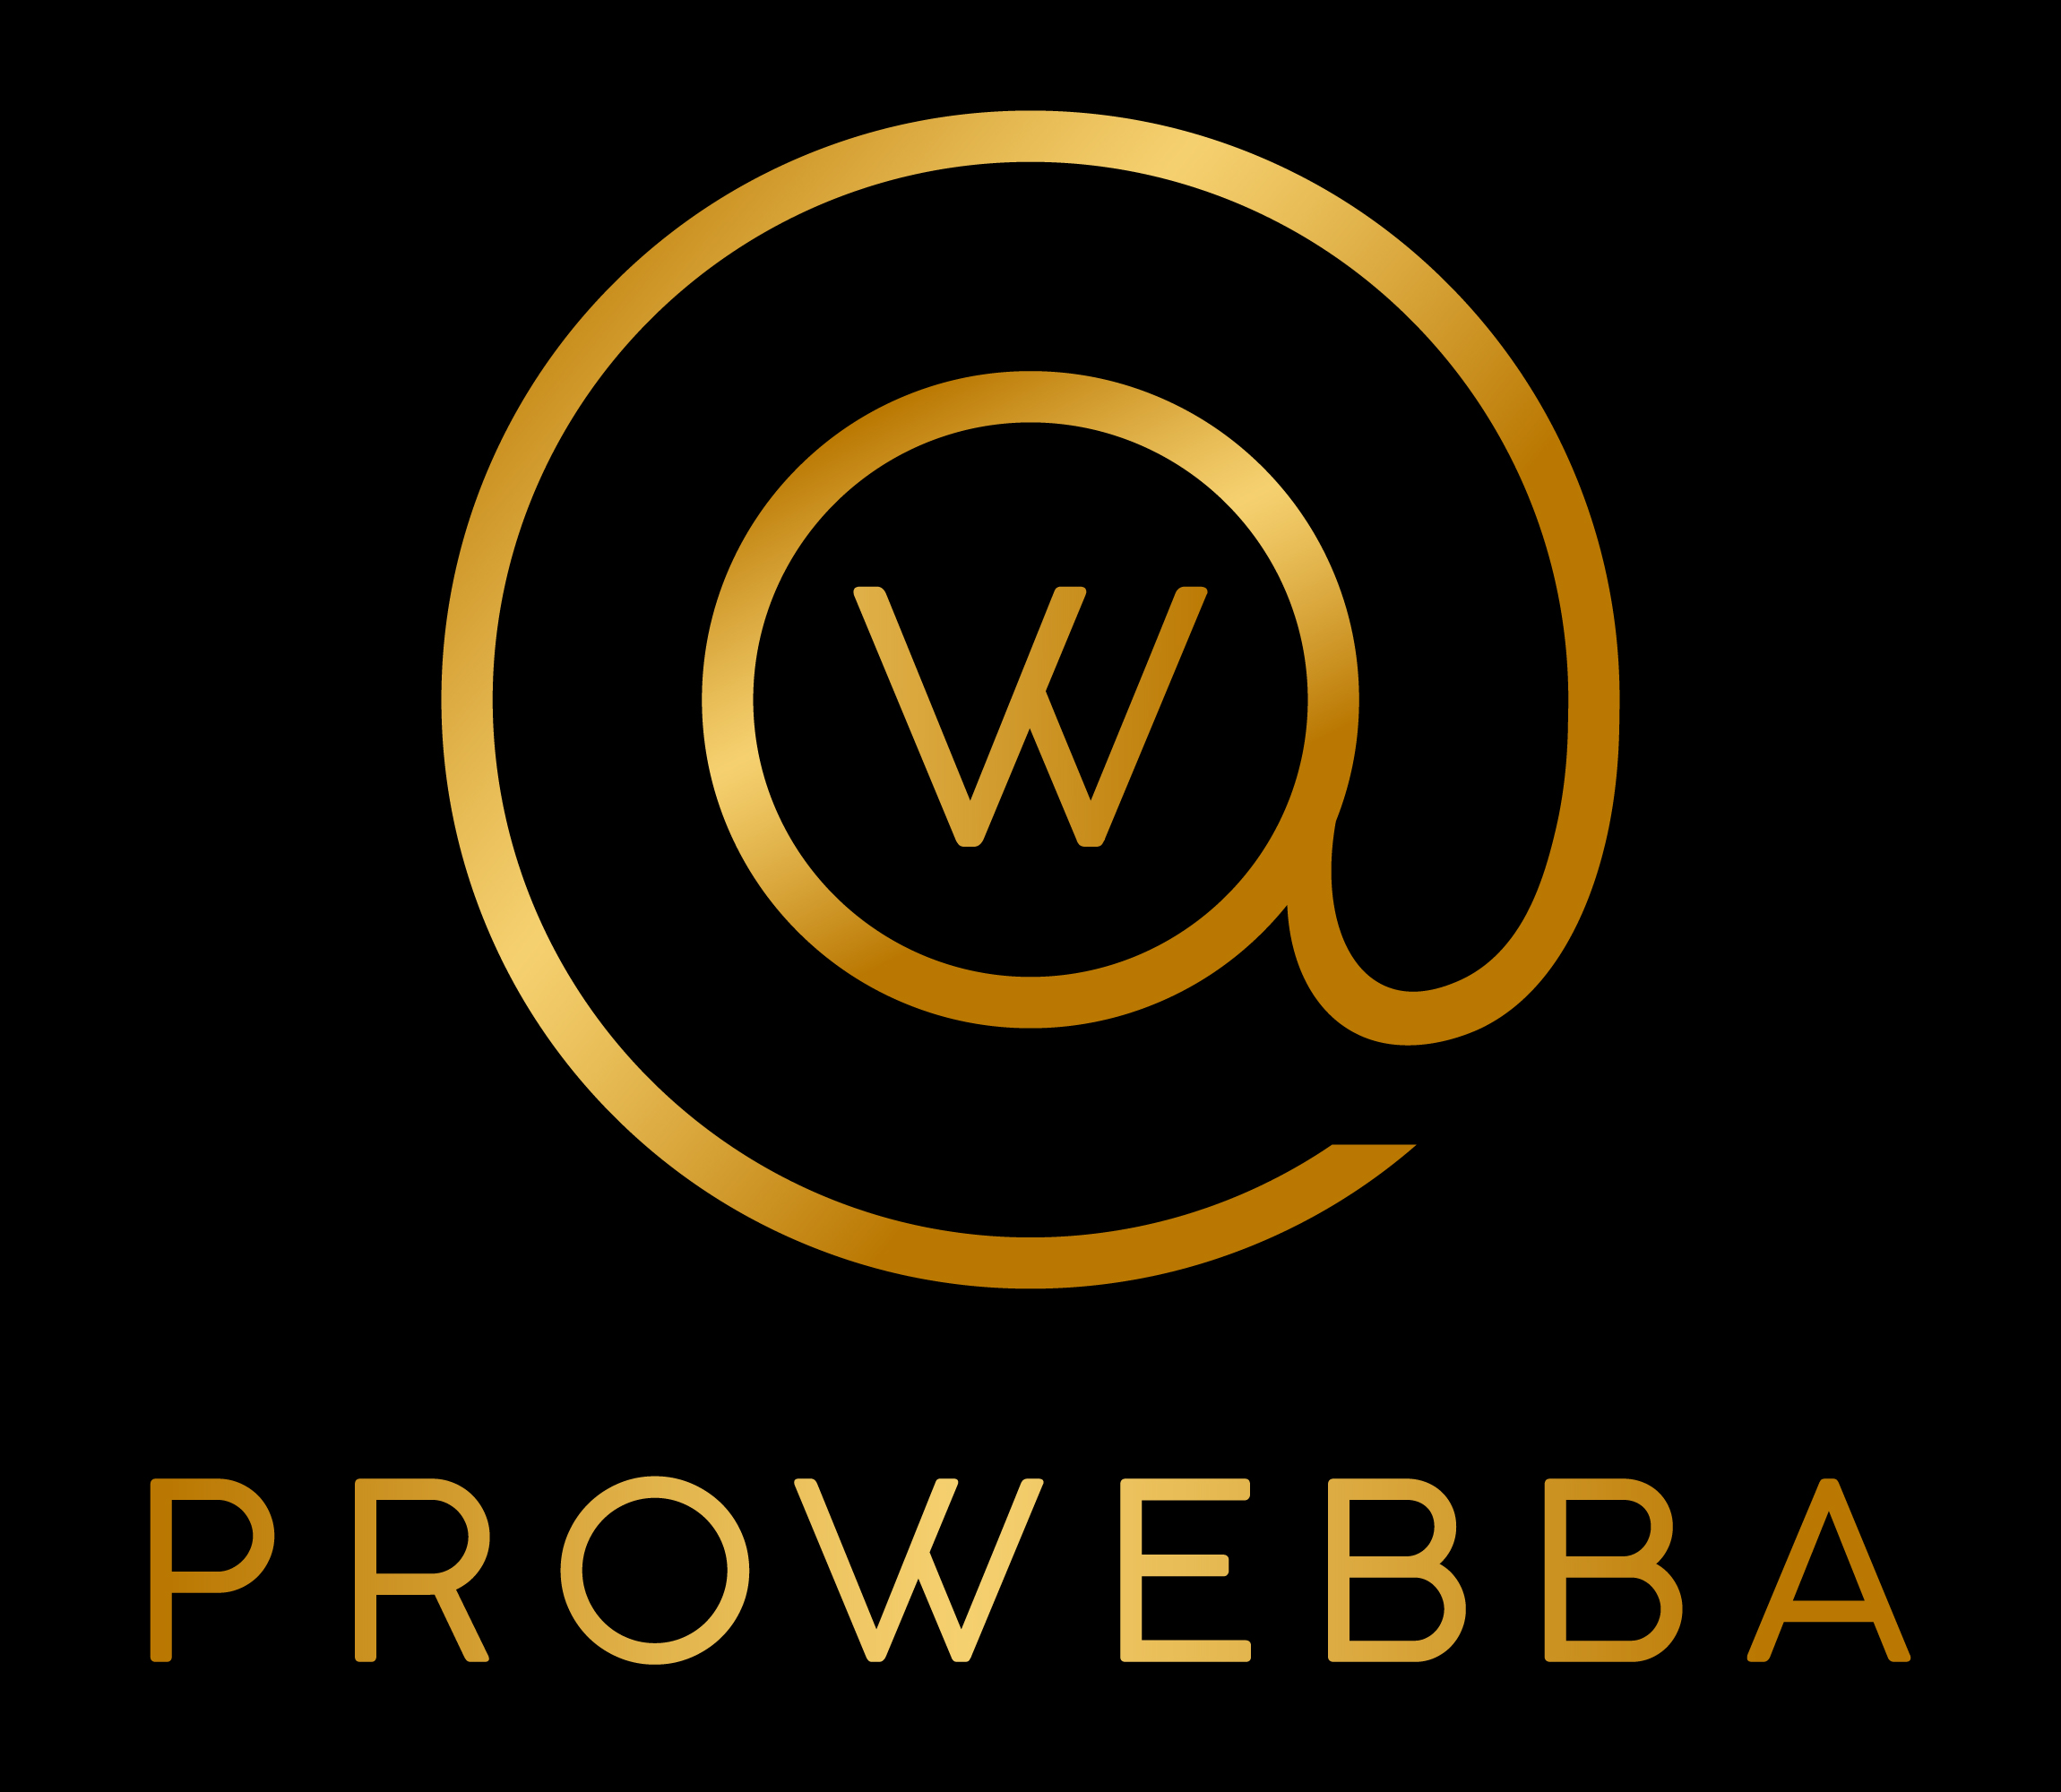 Prowebba